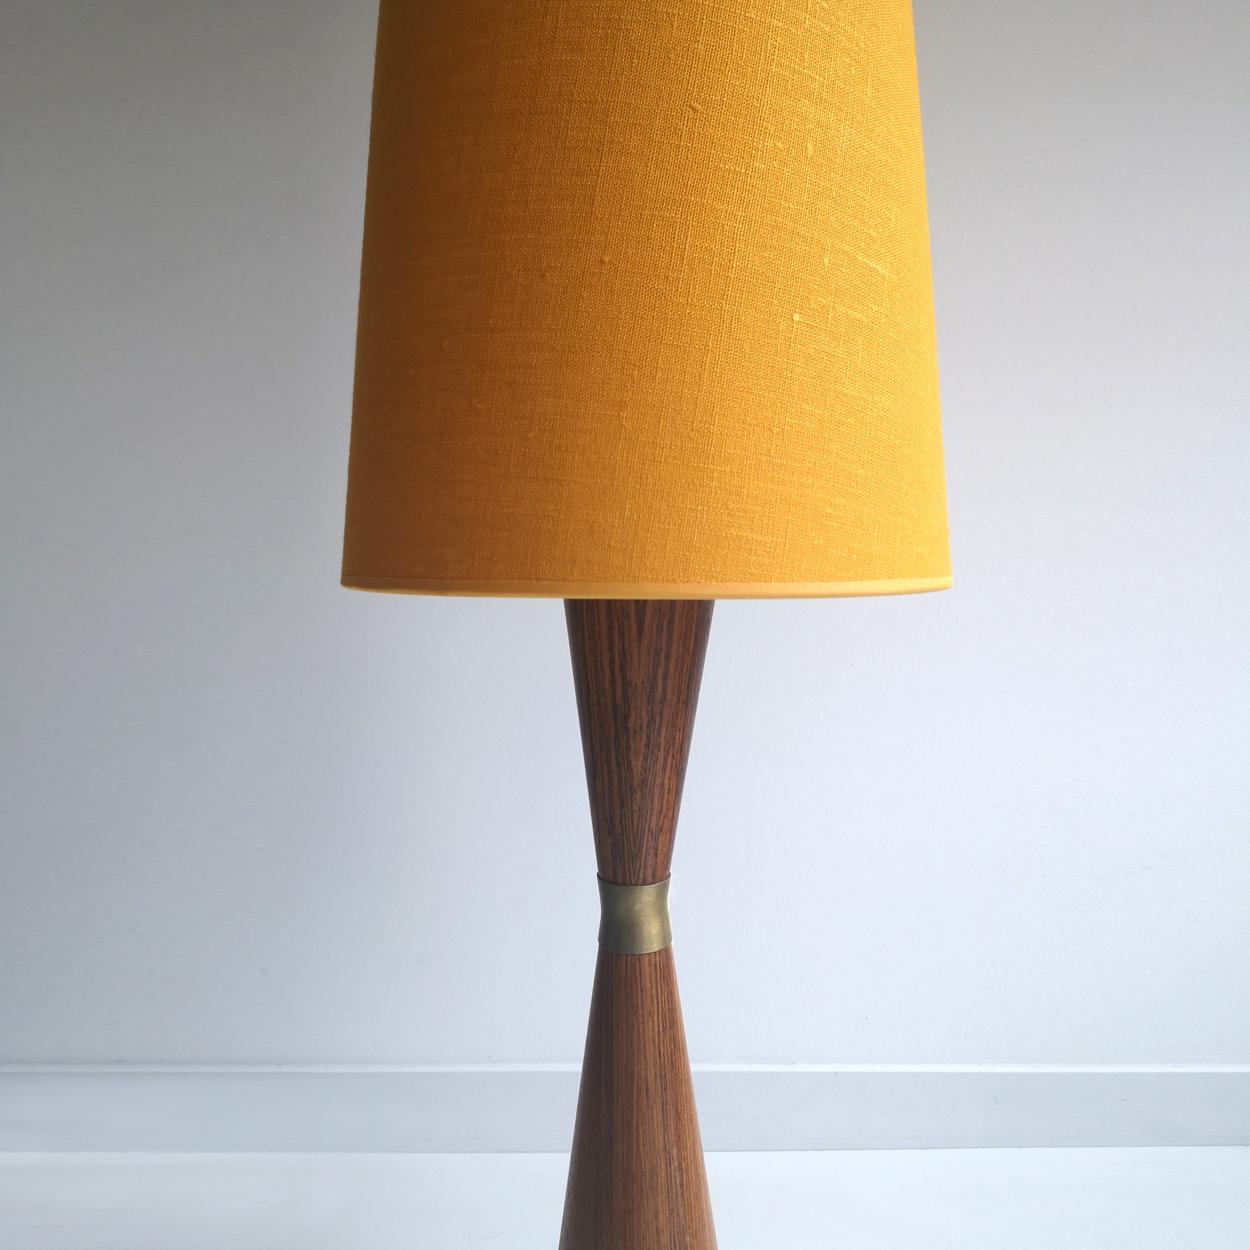 This rare modern teak diablo floor lamp was designed in the 1960s. The base is weighted for a sturdy. Very elegant and unusual. A copper cuff sits in the center. The new upholstered linen shade provides a warm glow.

In very good vintage